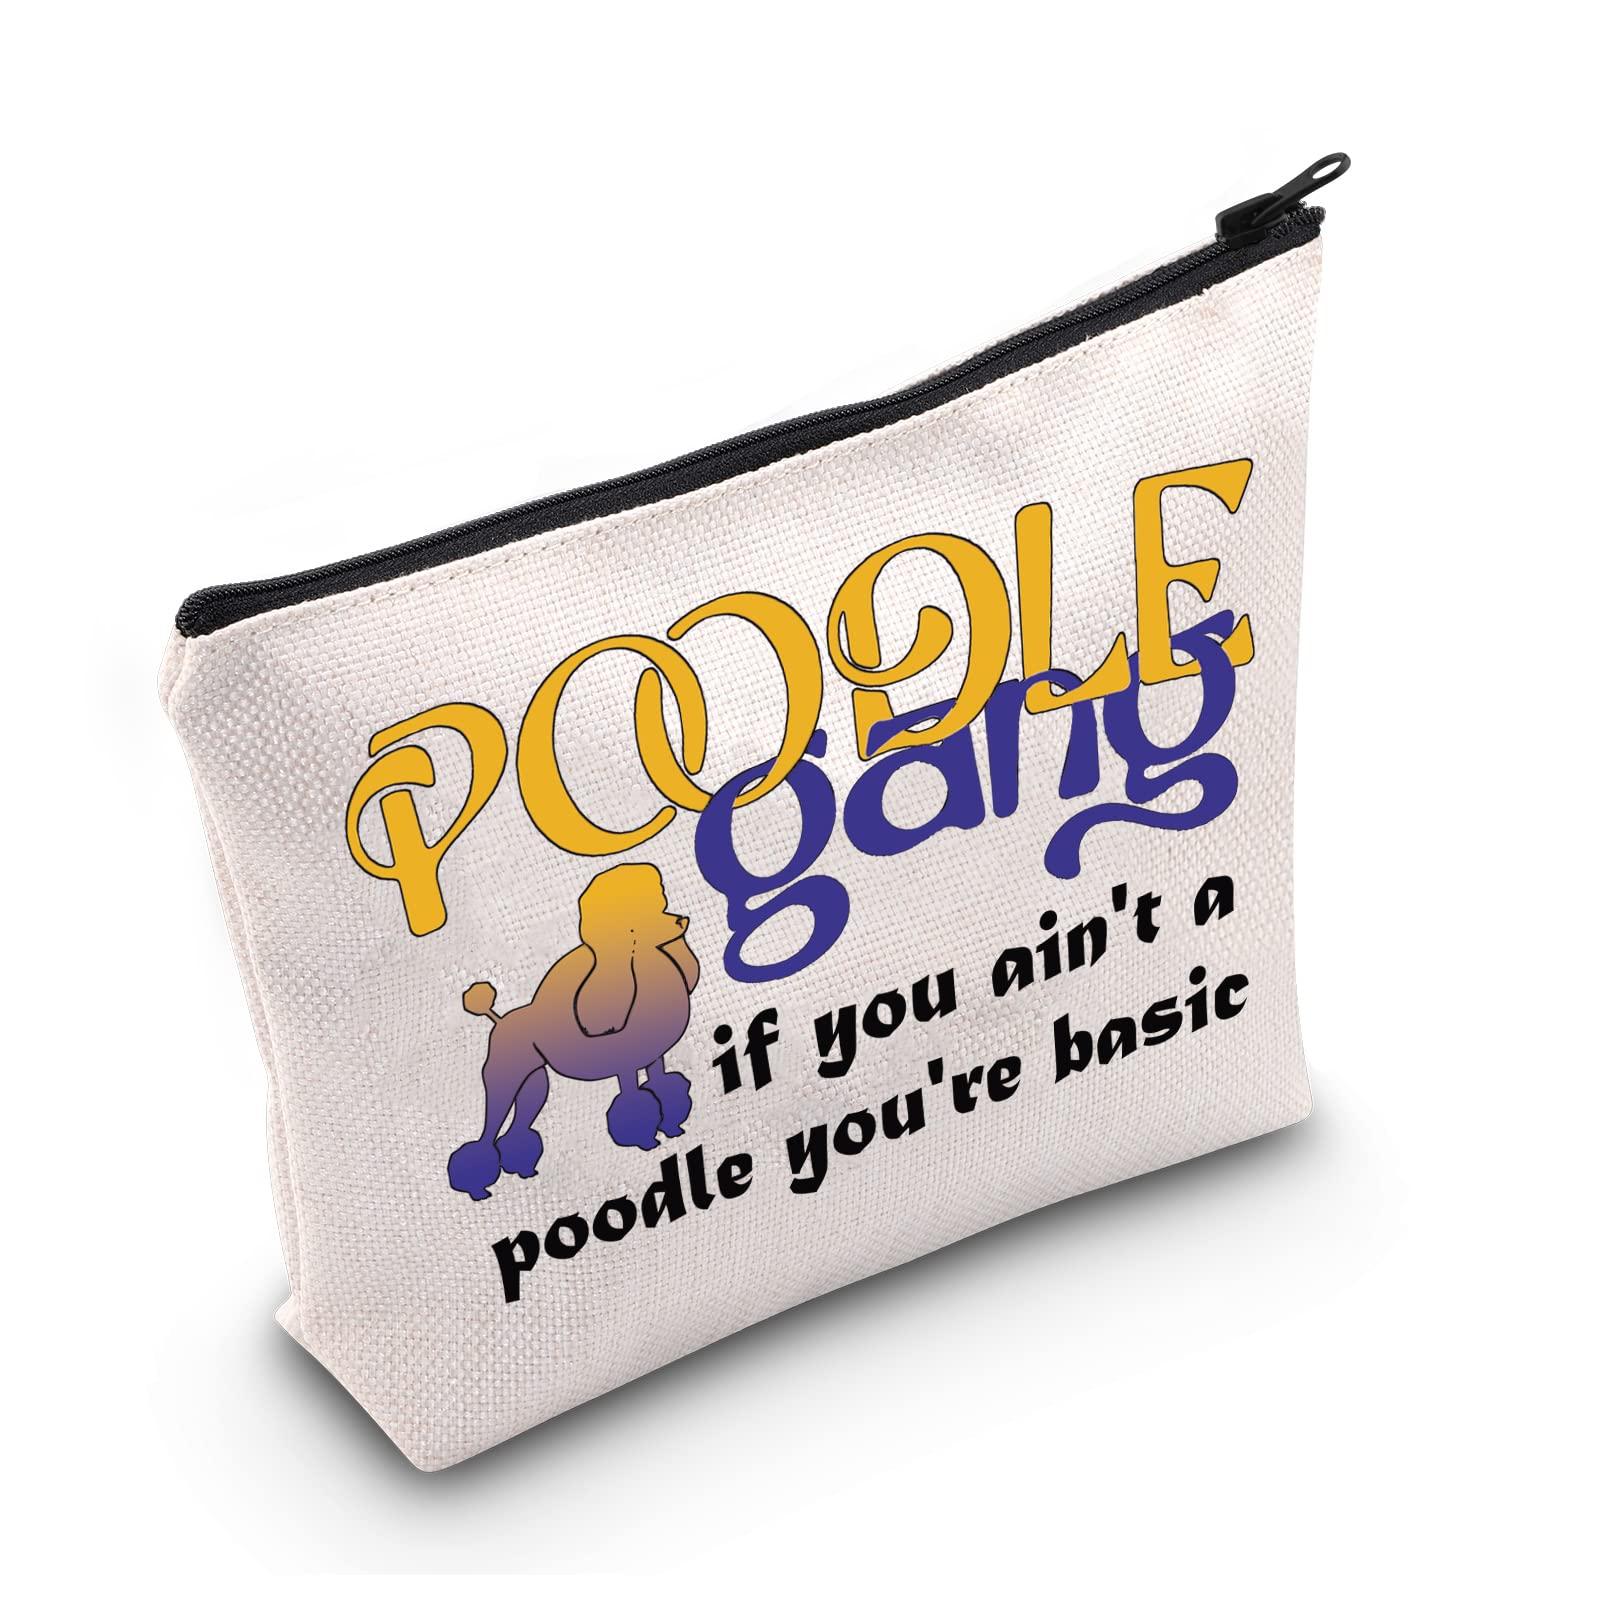 LEVLO Poodle Group Gift Poodle Gang If You Ain't A Poodle You're Basic Makeup Bag Pretty Poodle Travel Bruches Zipper Pouch, Poodle Gang